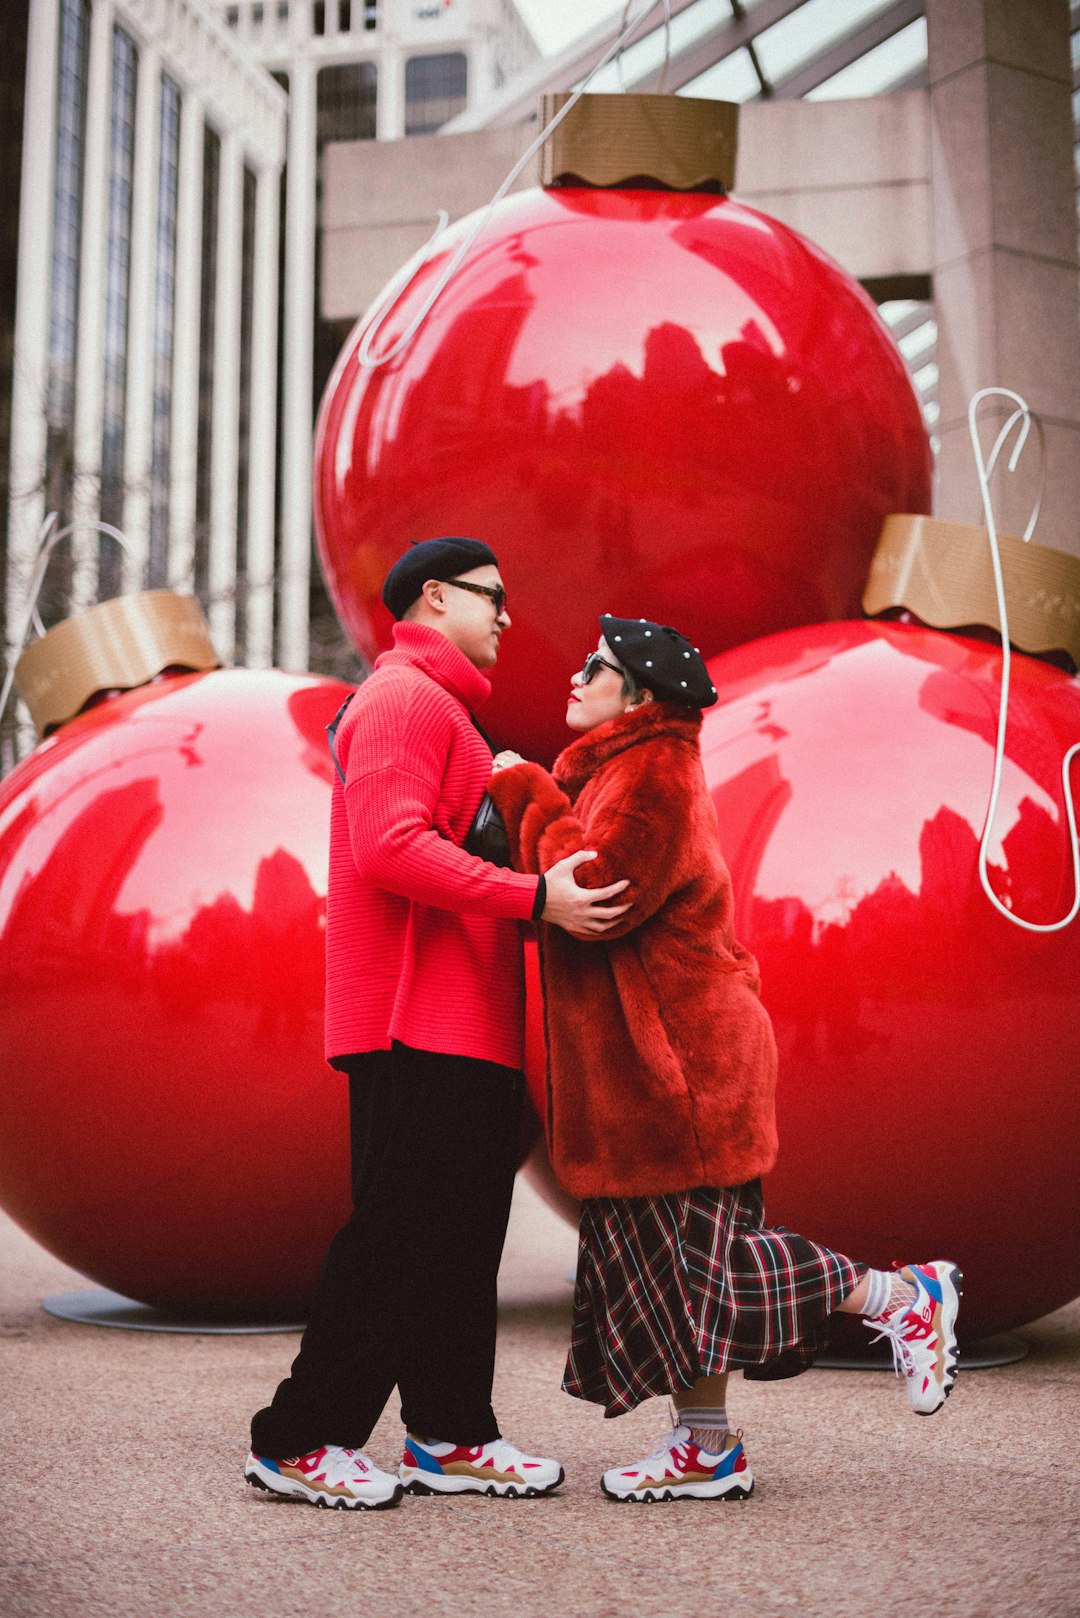 woman in red jacket and black pants carrying red heart balloon